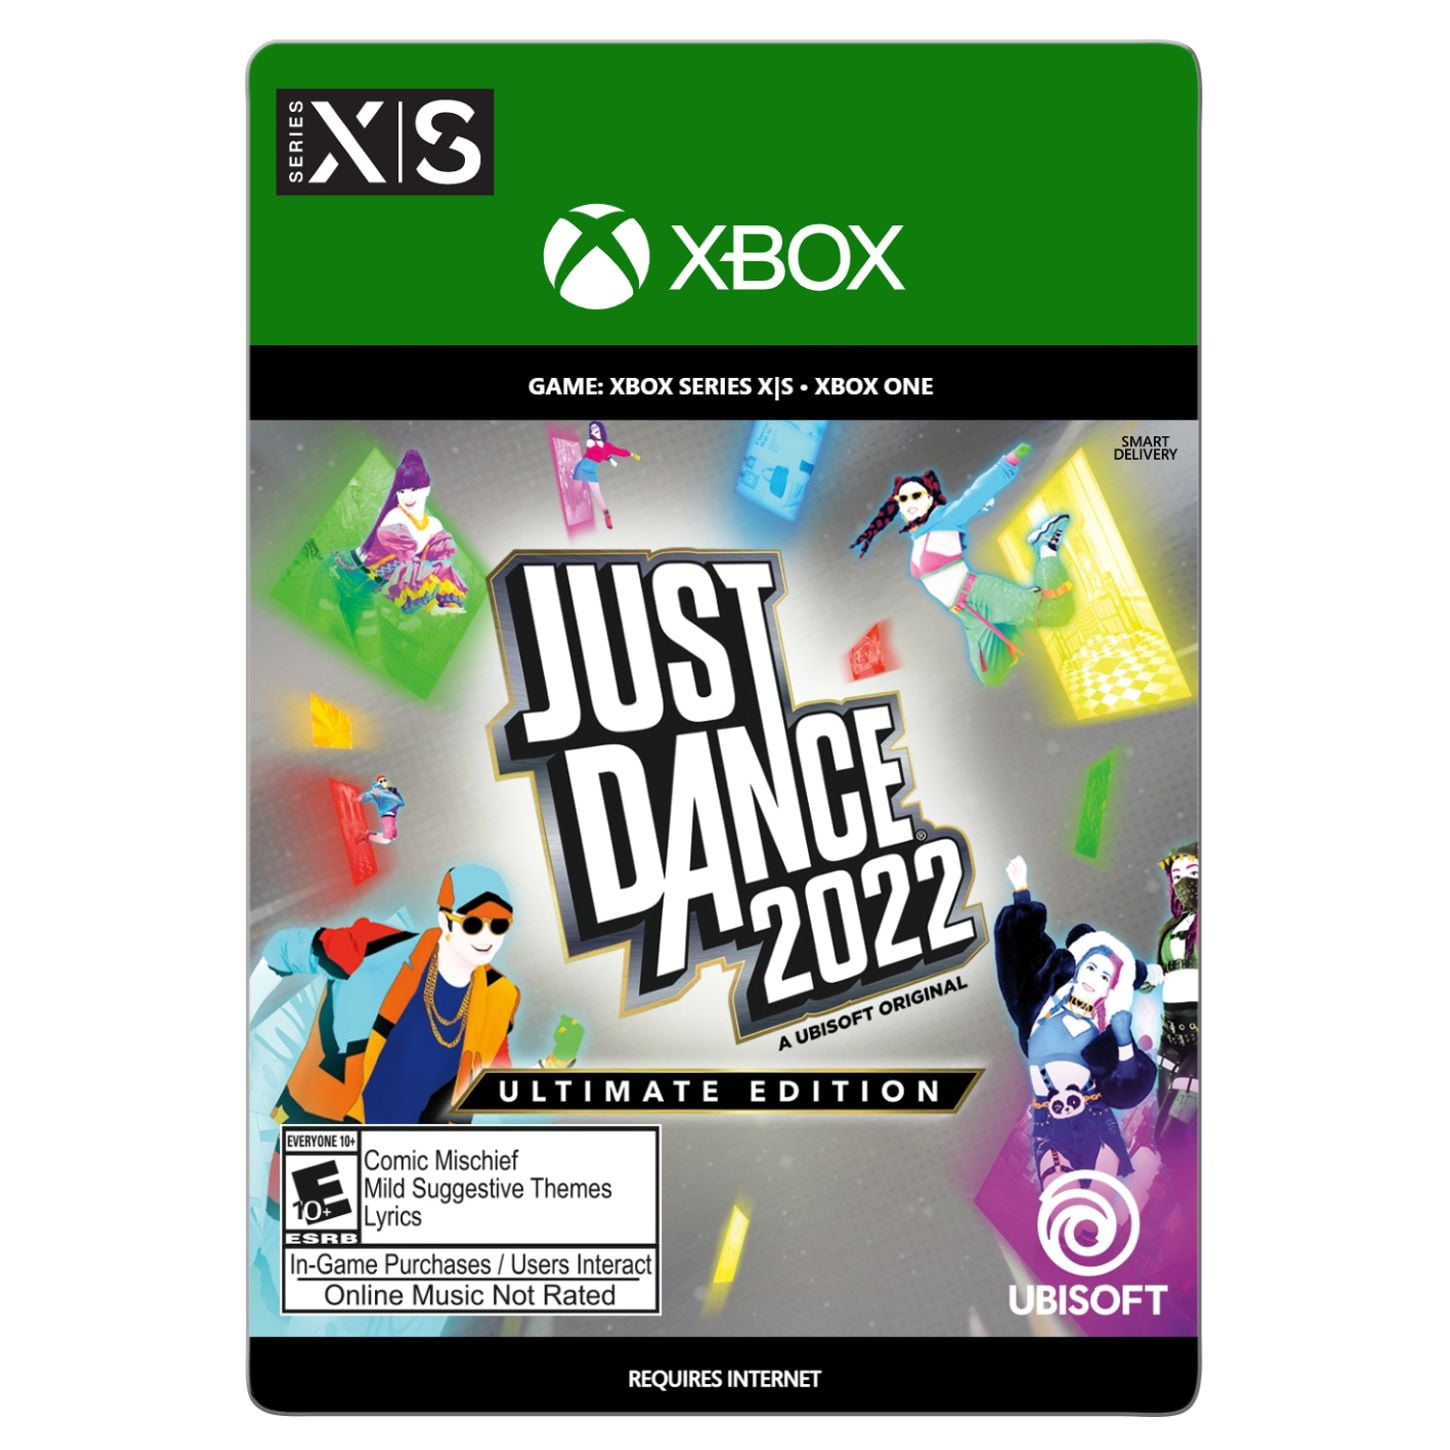 Just Dance 2022: Ultimate Edition, Ubisoft, Xbox One, Xbox Series X,S, [Digital], 72810